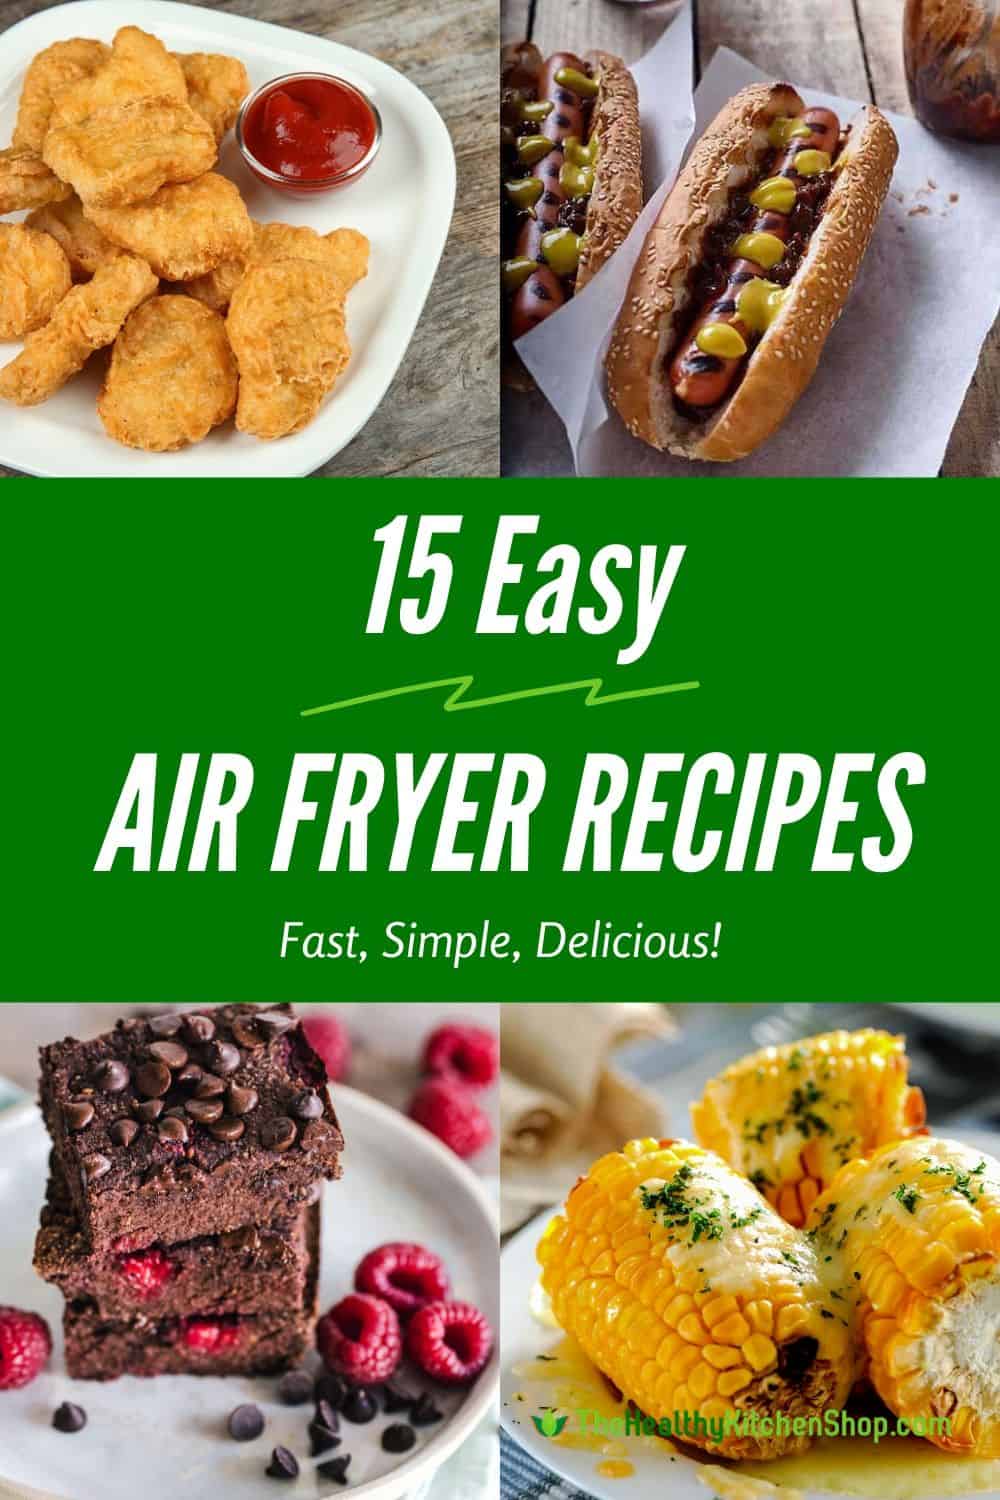 Roundup of 15 Easy Air Fryer Recipes